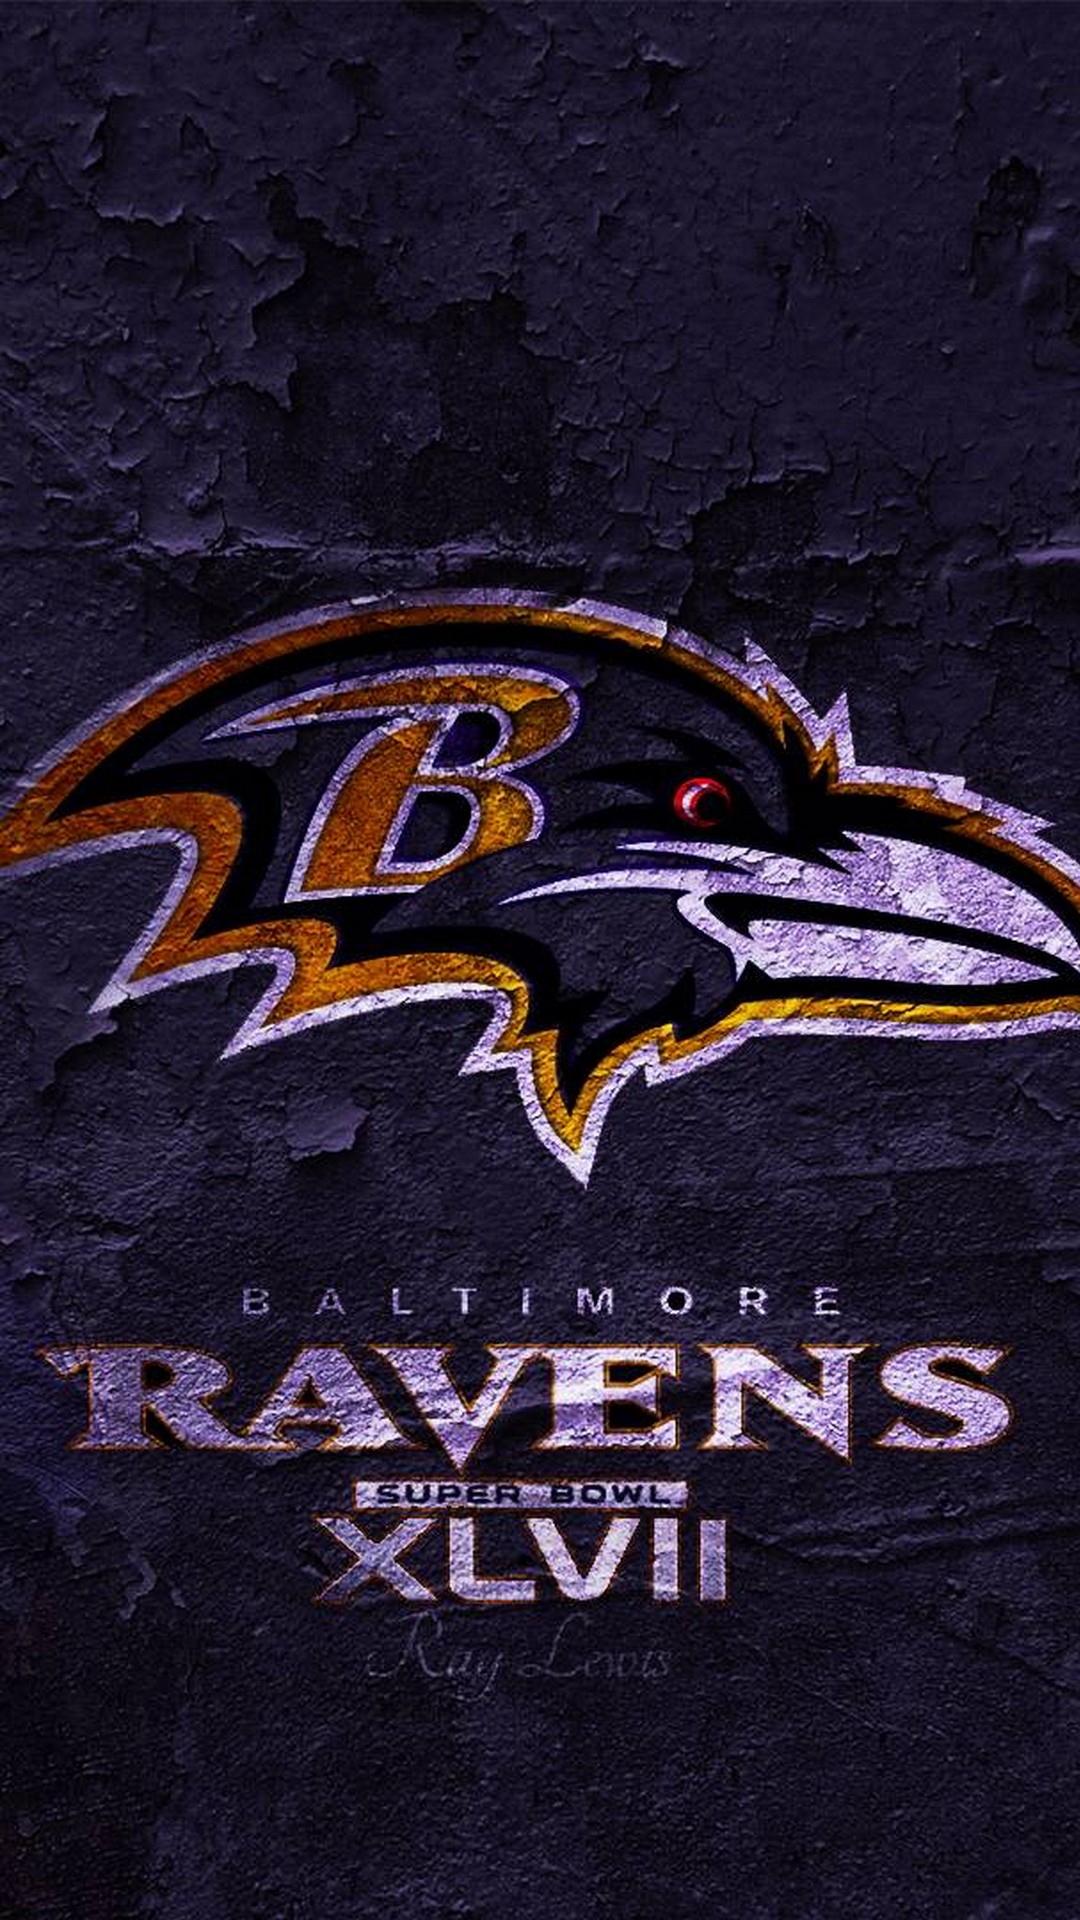 Baltimore Ravens iPhone 7 Plus Wallpaper With high-resolution 1080X1920 pixel. Download and set as wallpaper for Apple iPhone X, XS Max, XR, 8, 7, 6, SE, iPad, Android